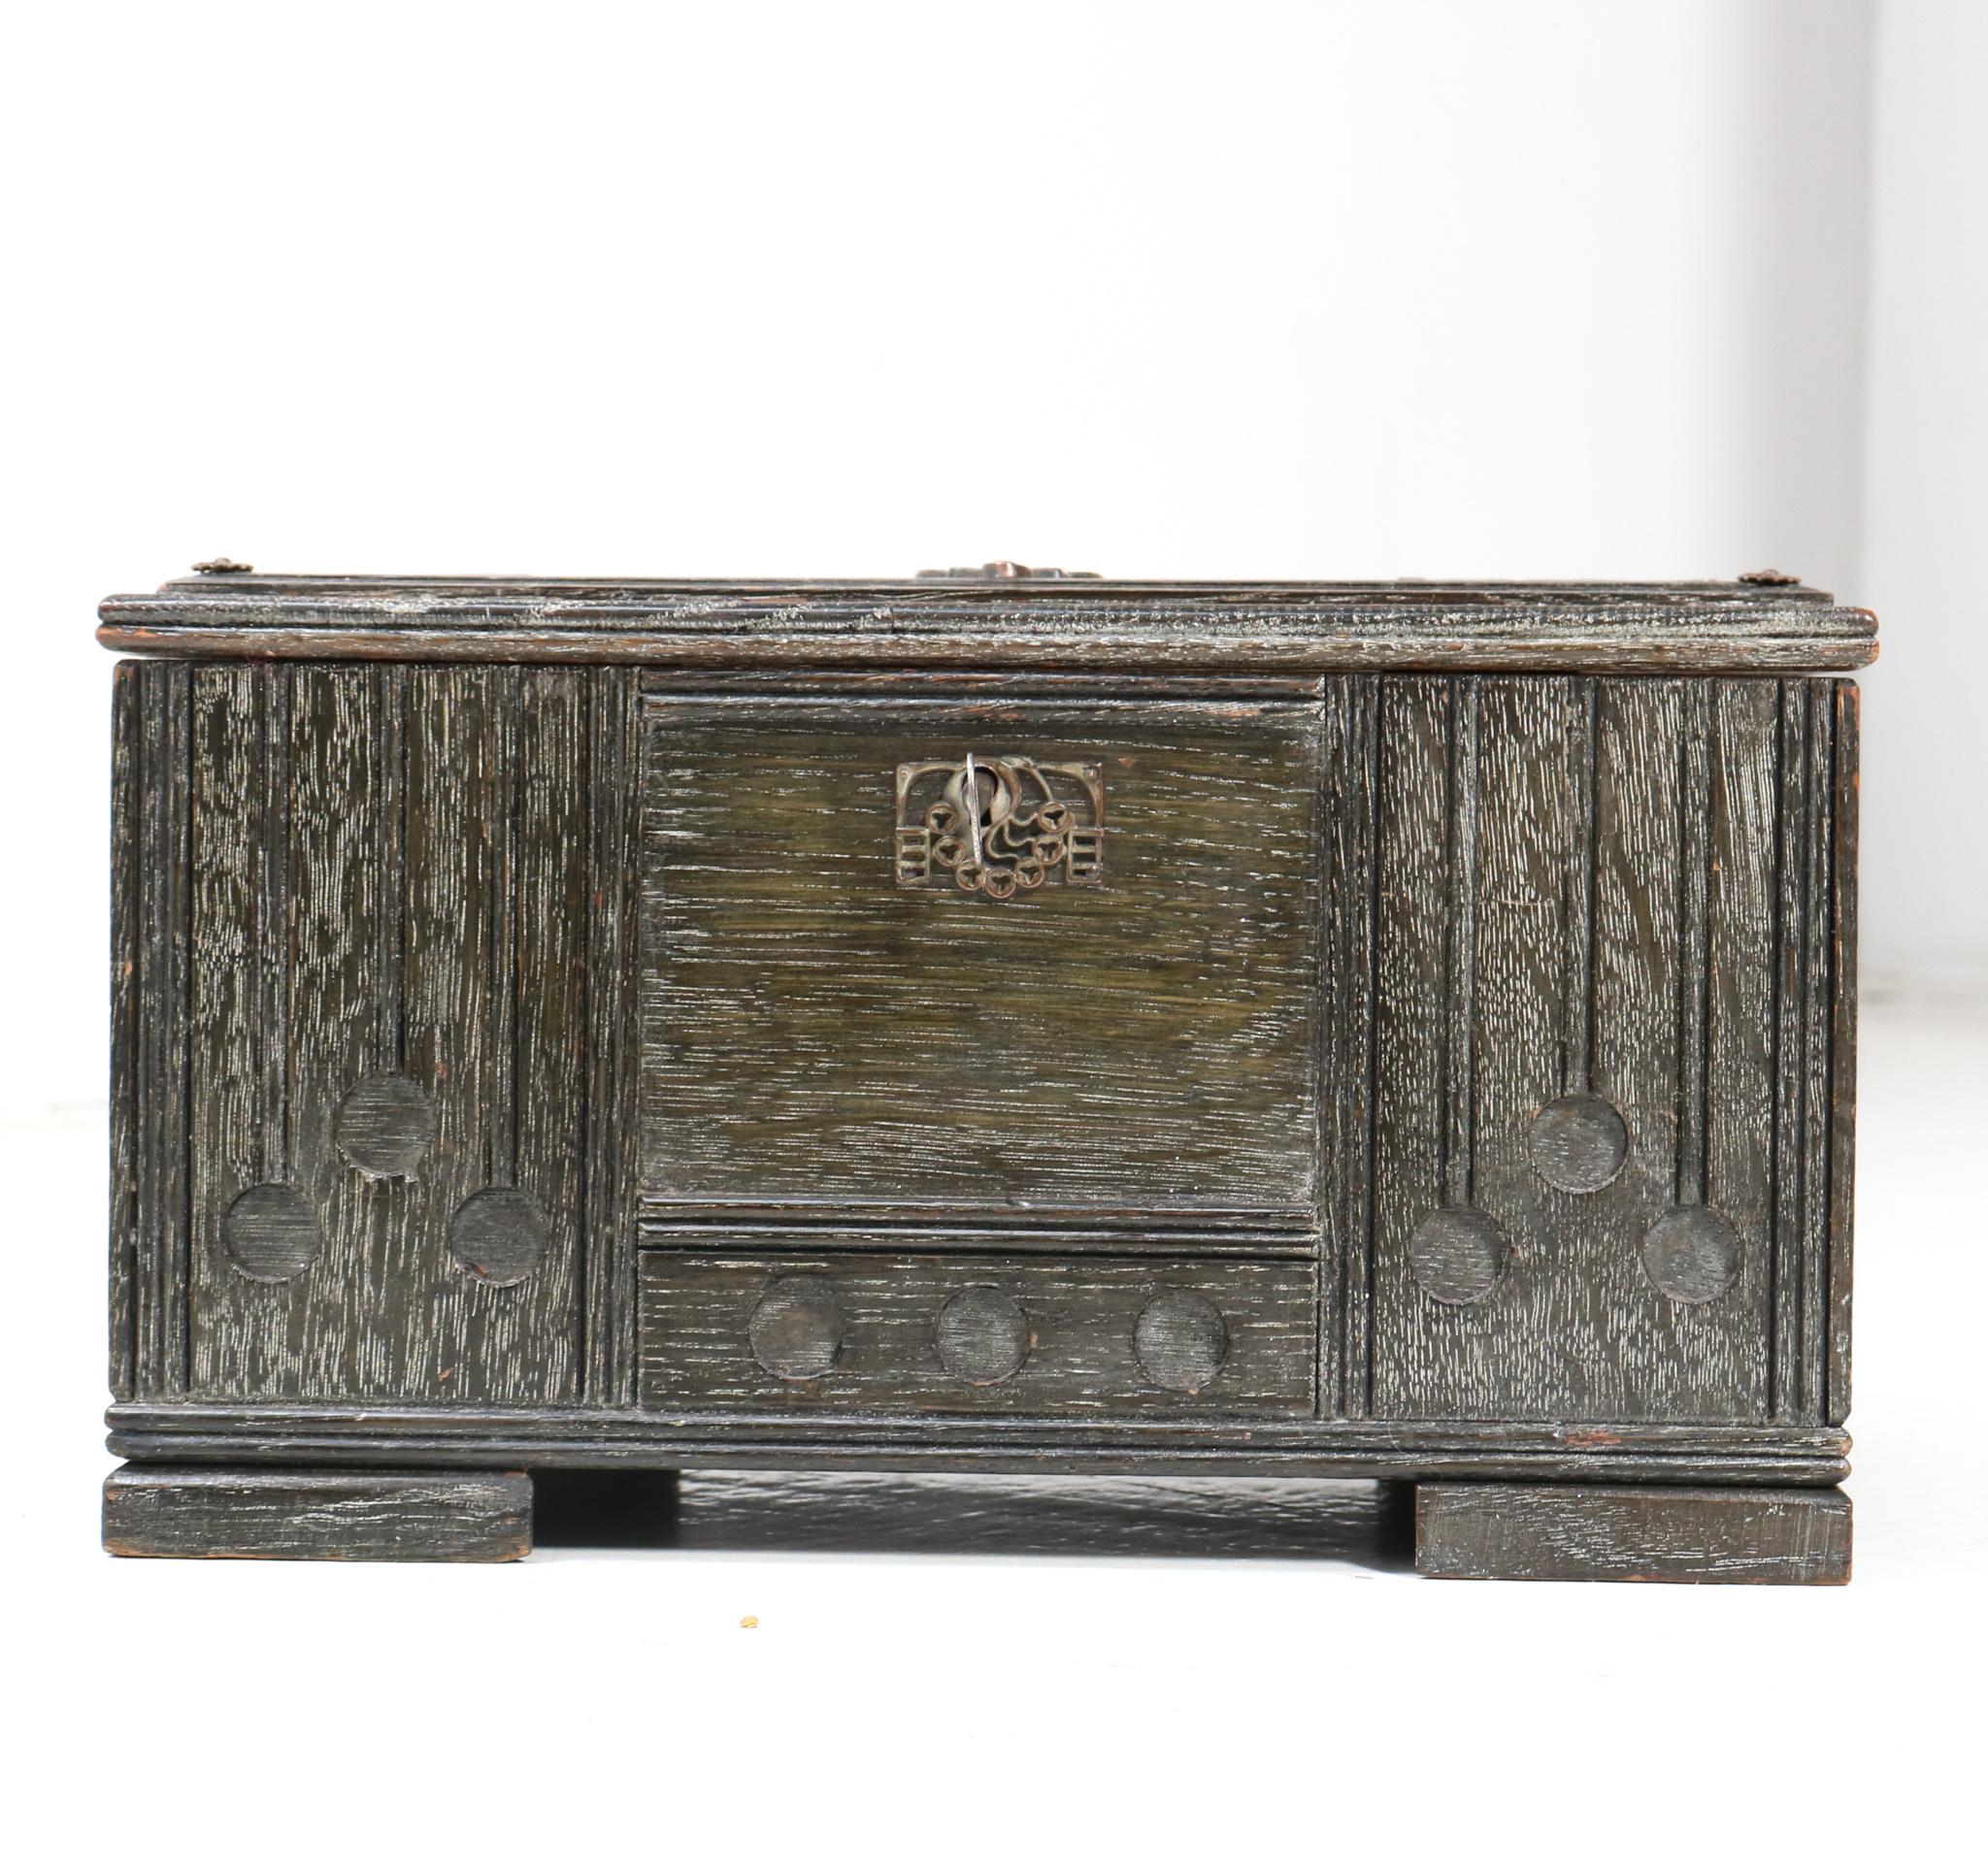 Stunning and rare Vienna Secession decorative box.
Design in the style of Josef Hoffmann.
Striking Austrian design from the 1900s.
Solid stained oak with hand-crafted geometric elements.
Original patinated brass decoration.
The lock and key are